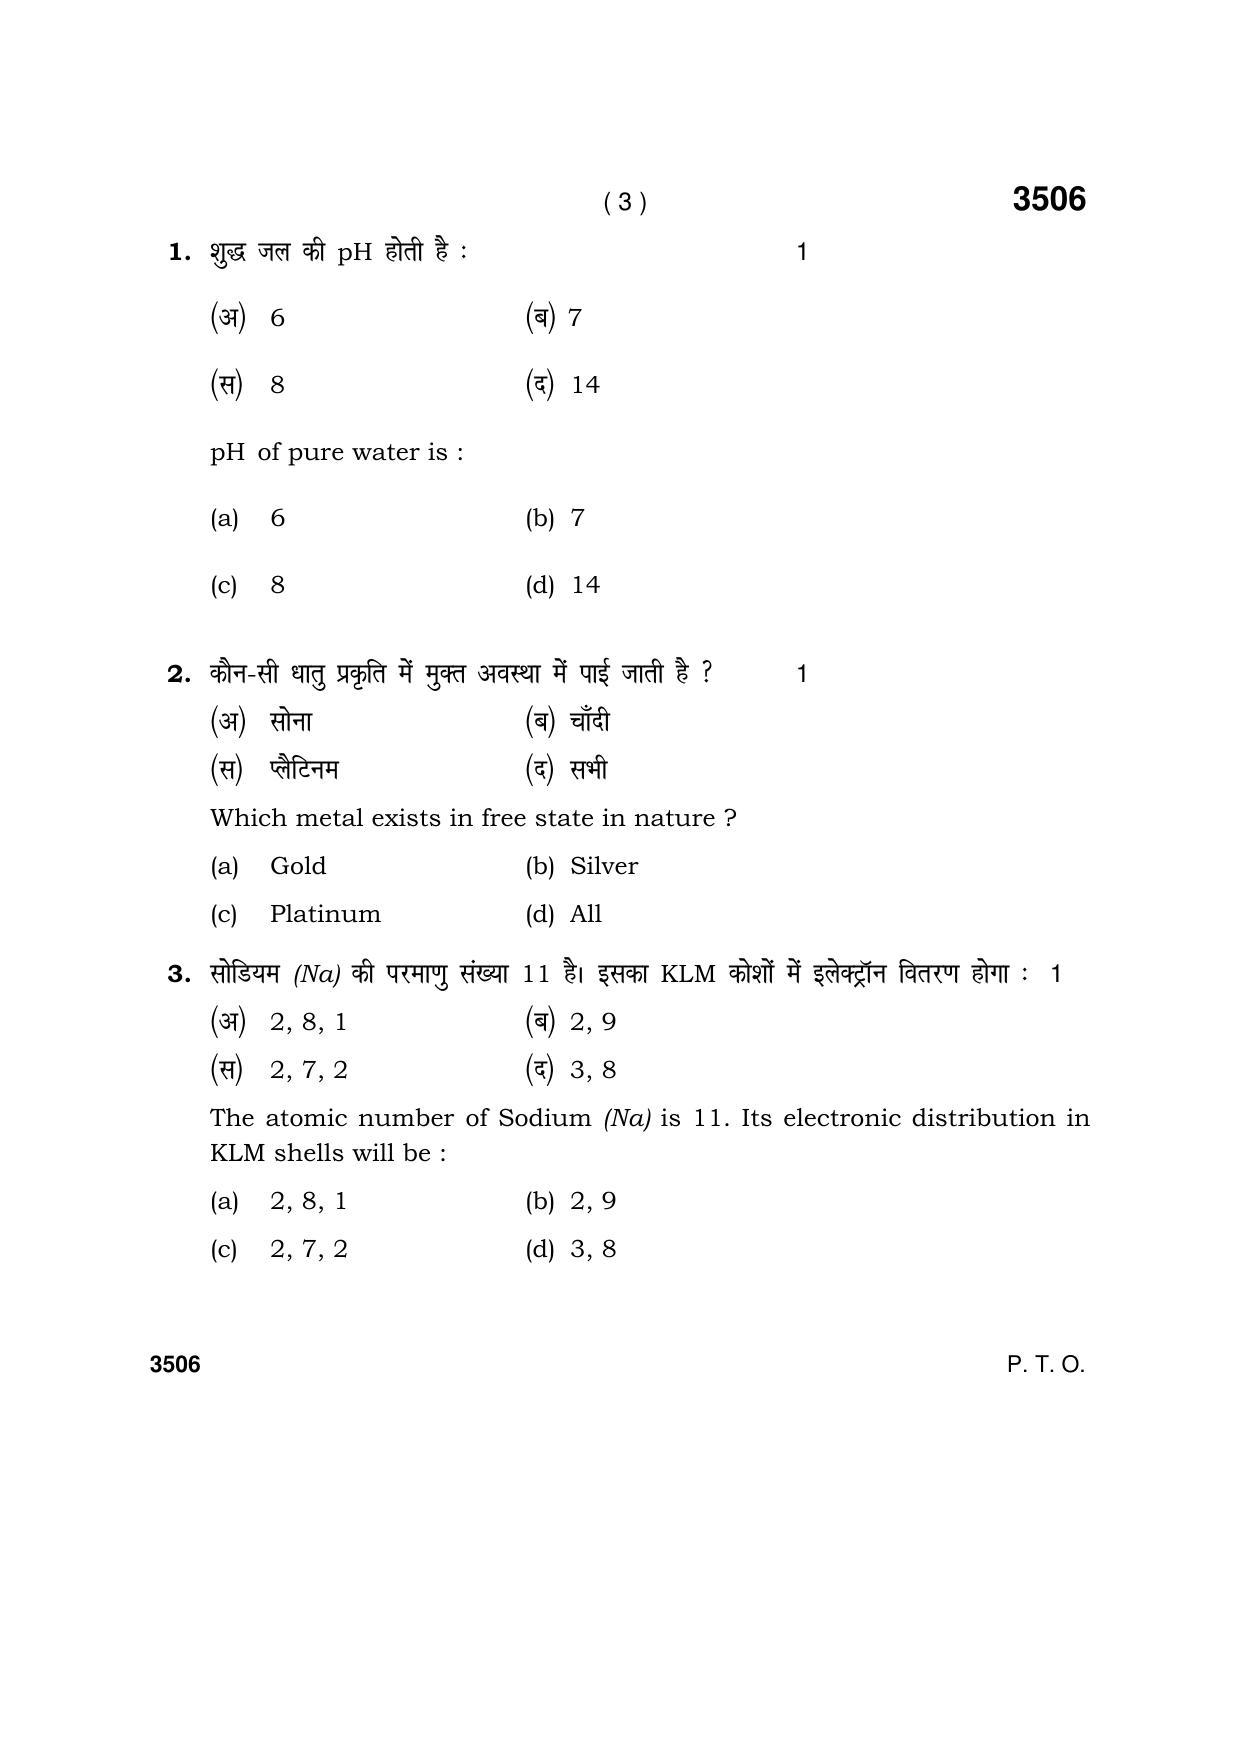 Haryana Board HBSE Class 10 Science (V C C) 2018 Question Paper - Page 3